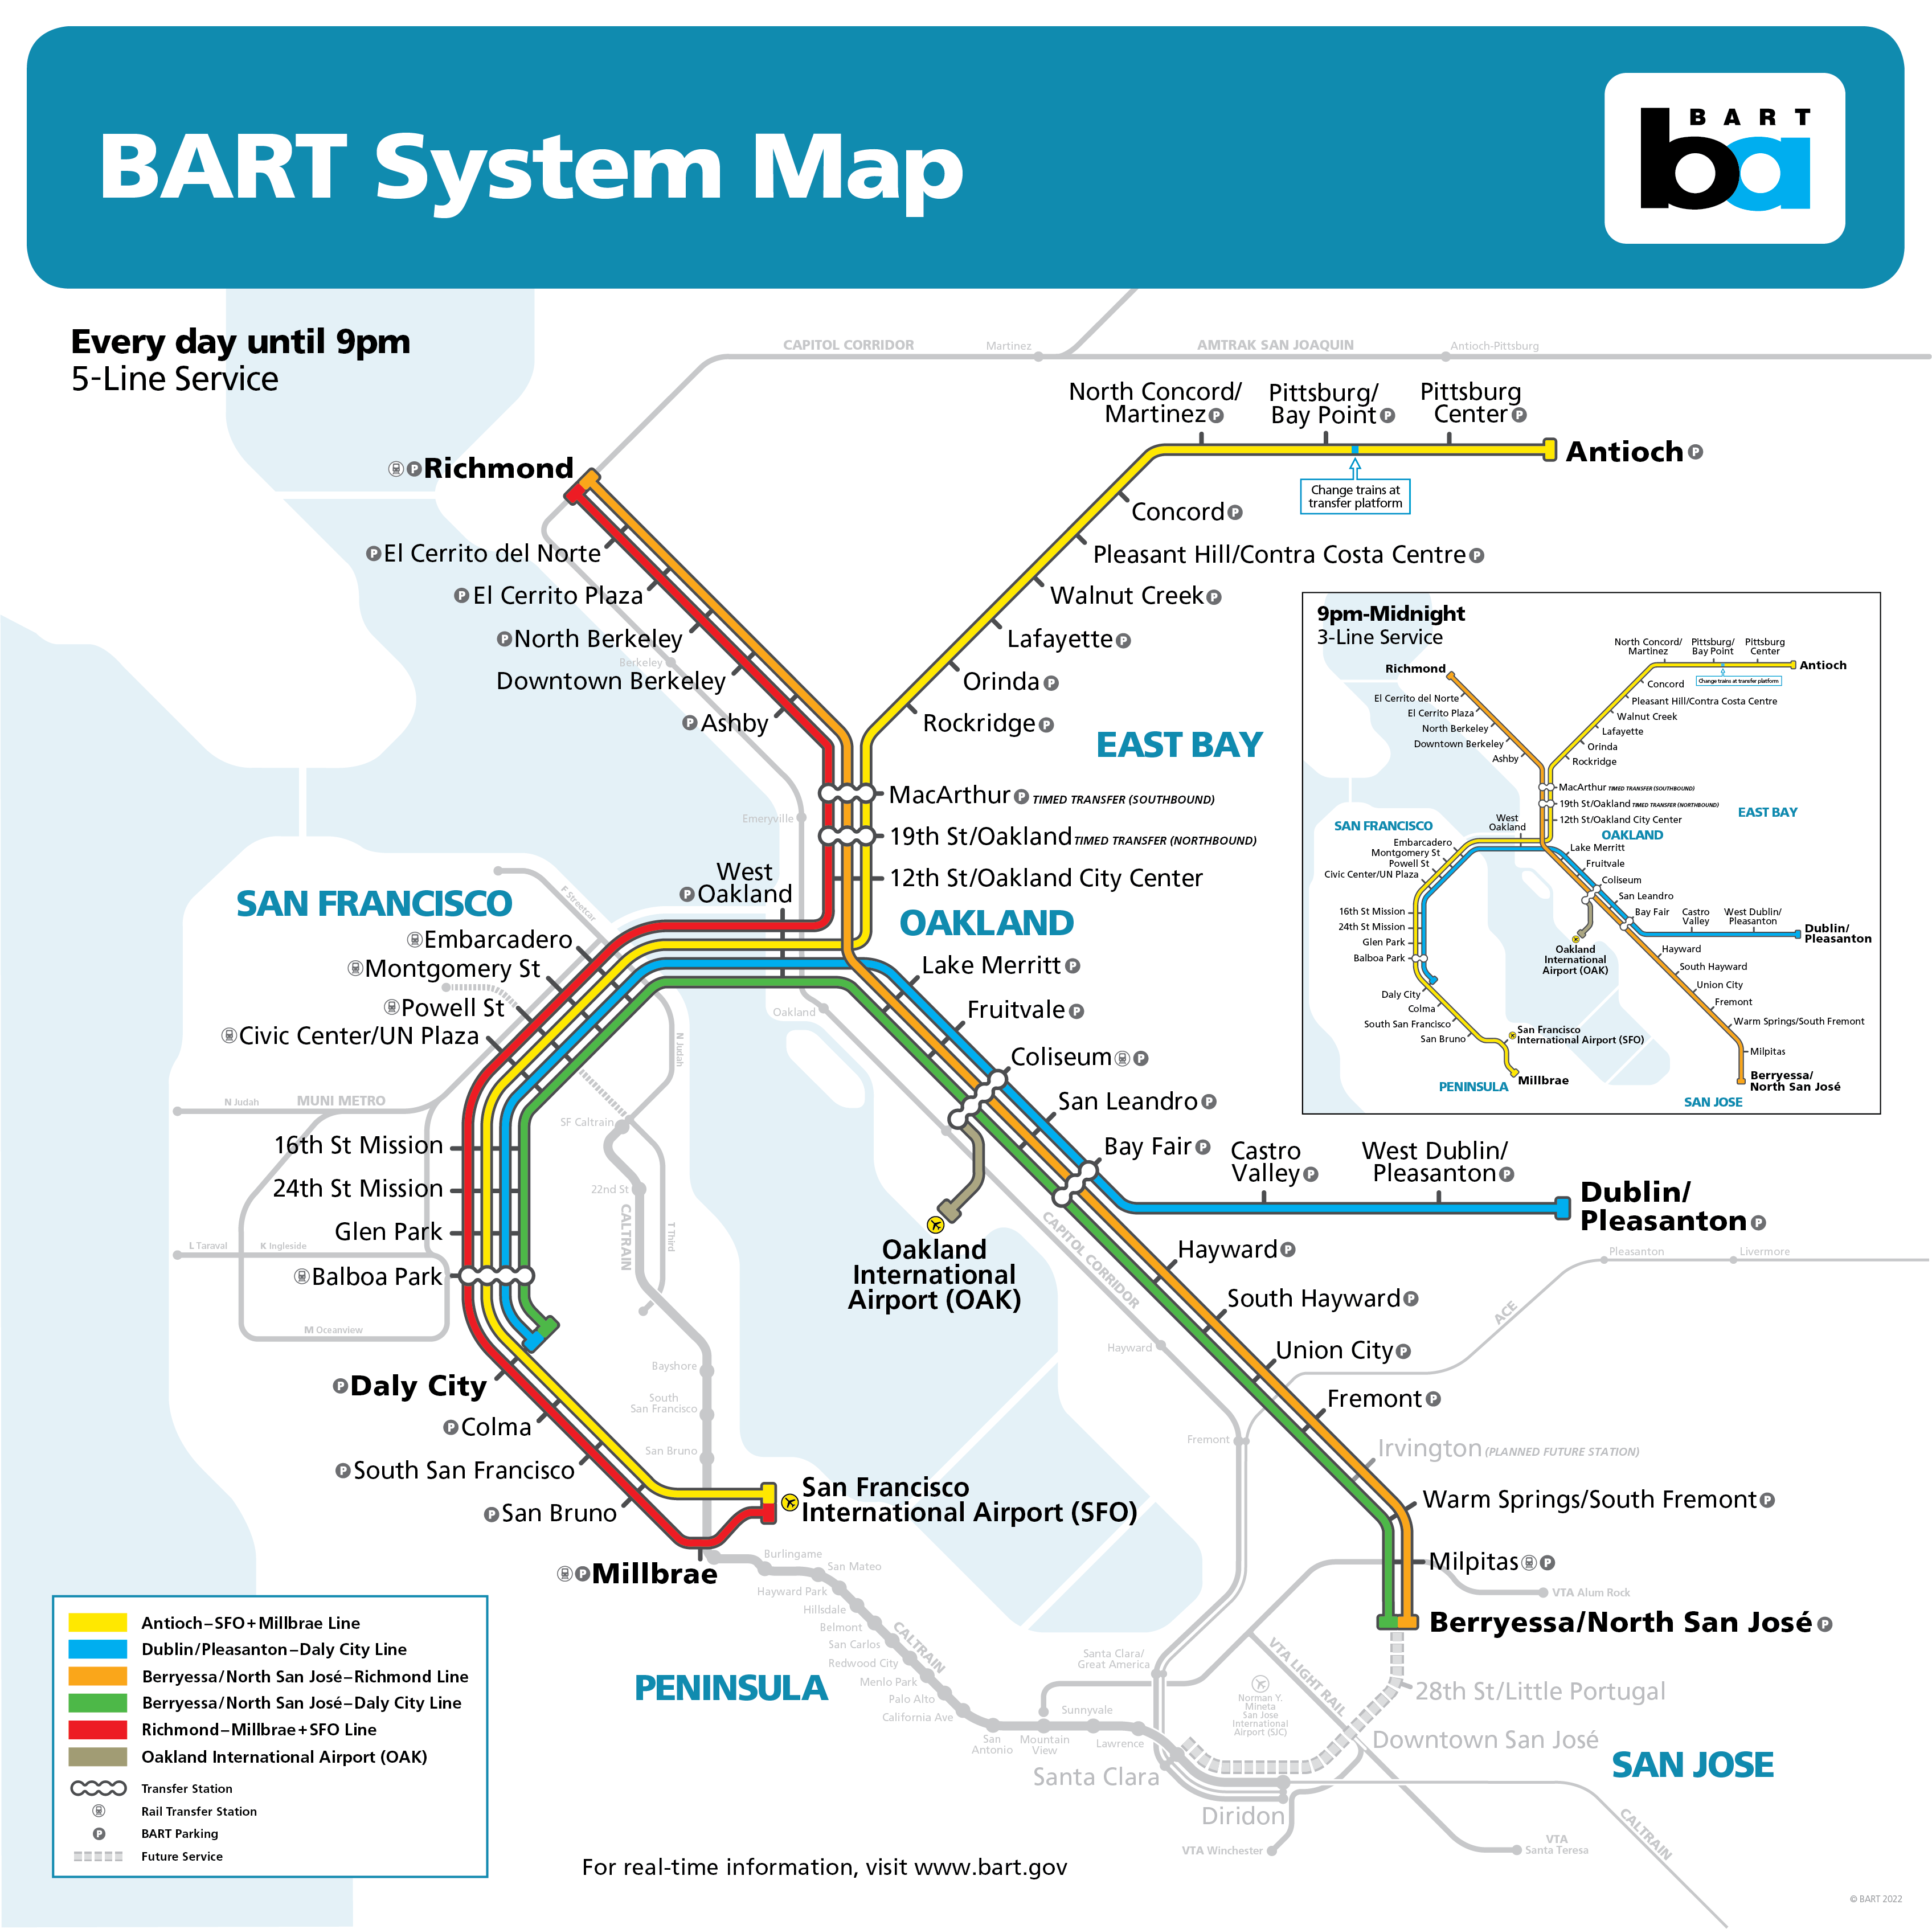 BART station map as of Feb 14 2022 